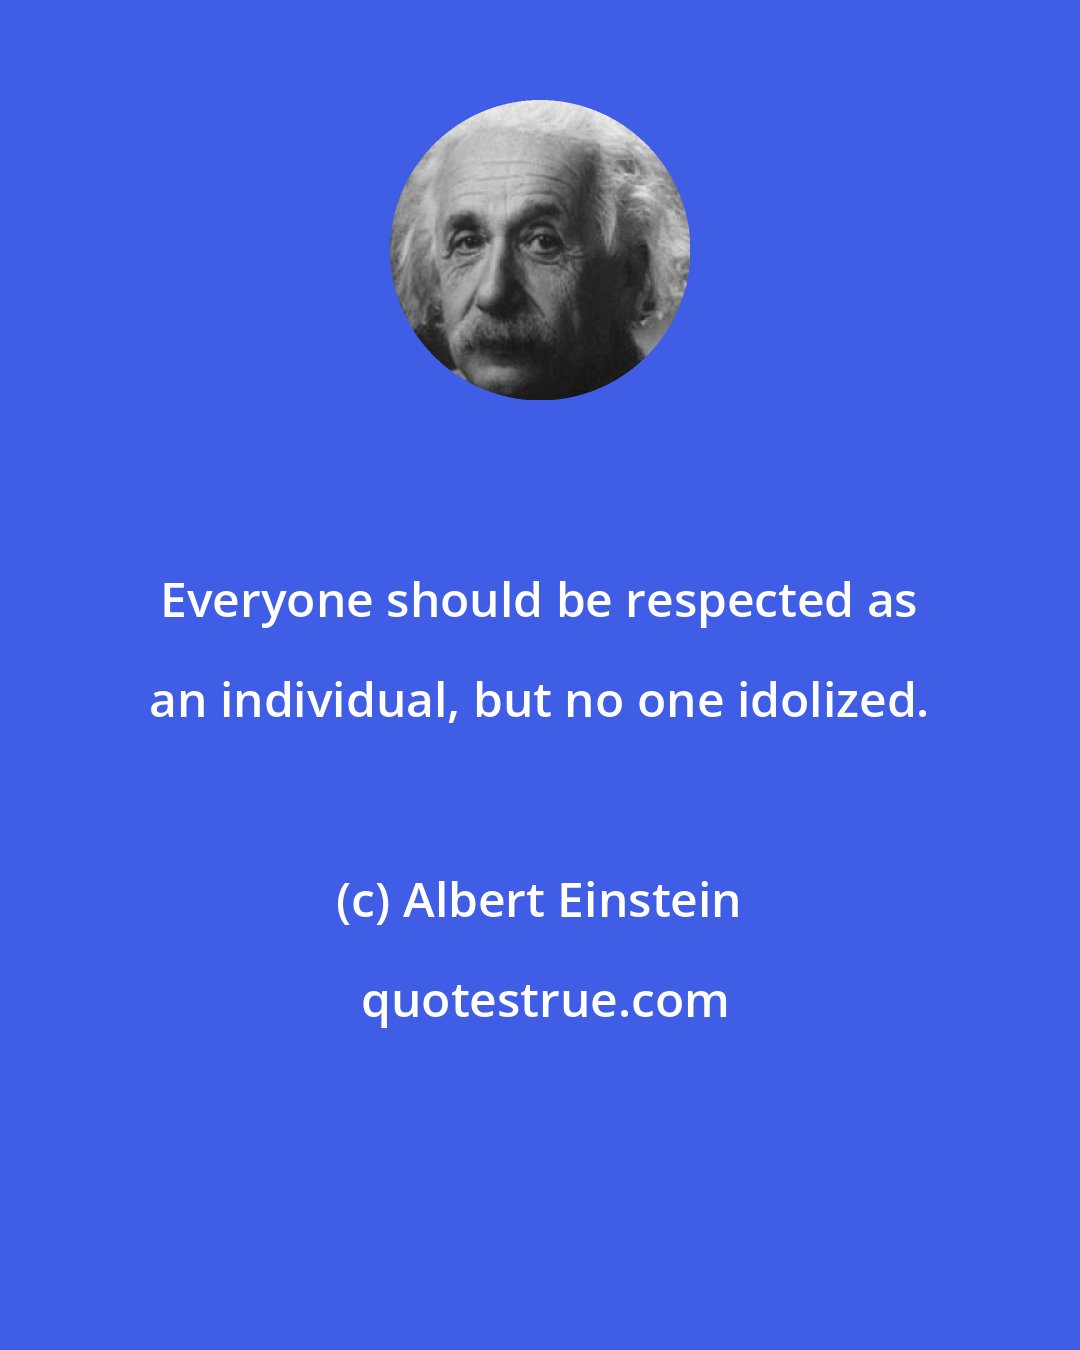 Albert Einstein: Everyone should be respected as an individual, but no one idolized.